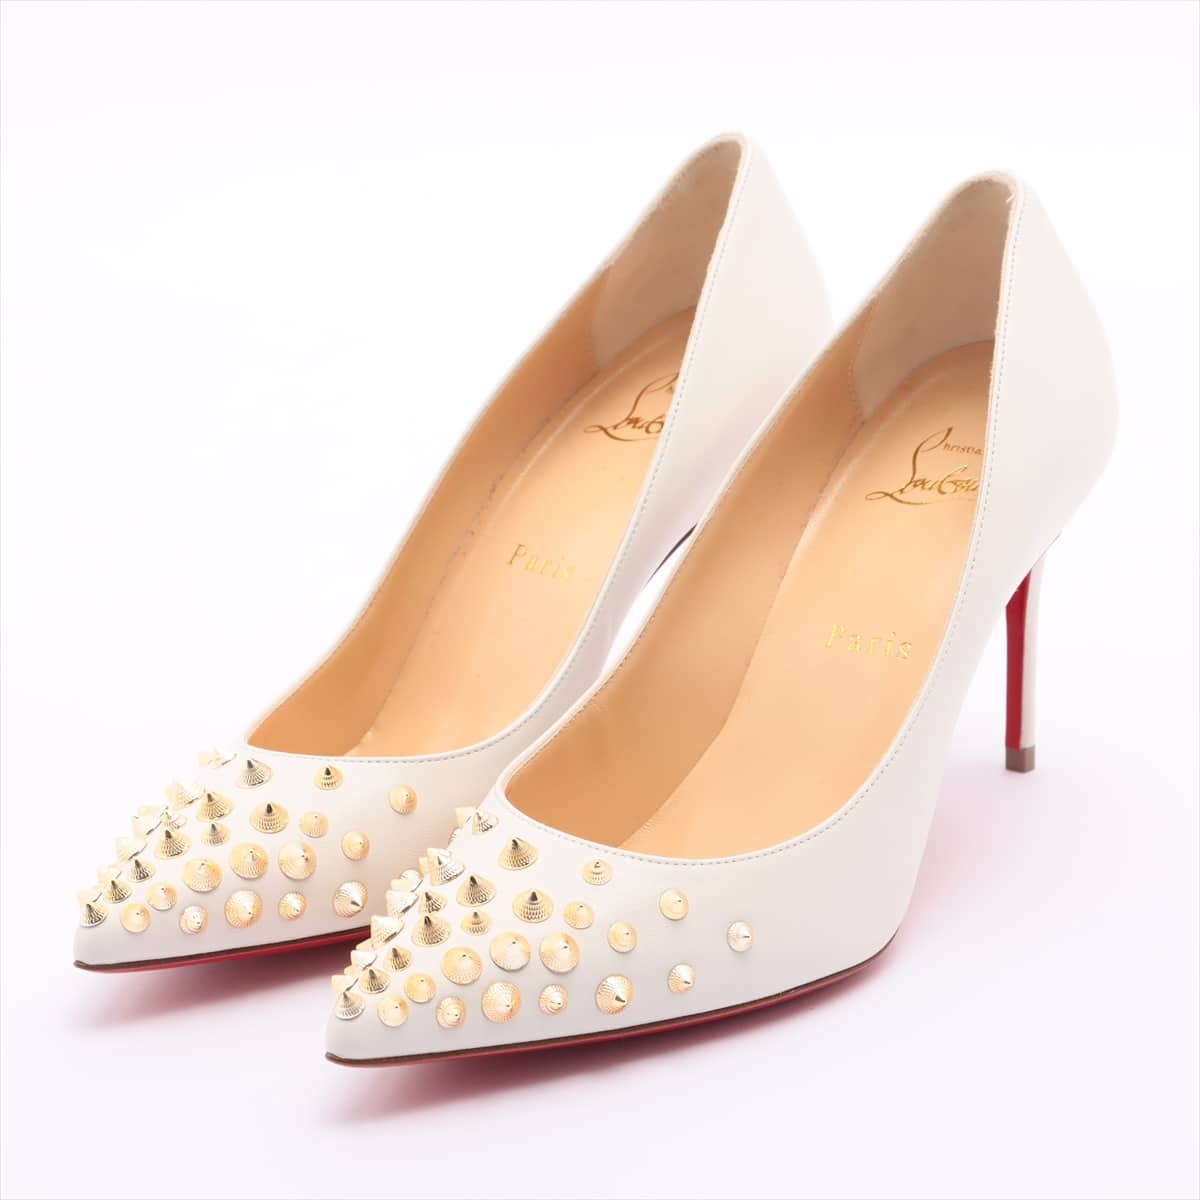 Christian Louboutin Leather Pumps 37 Ladies' White Spike Studs